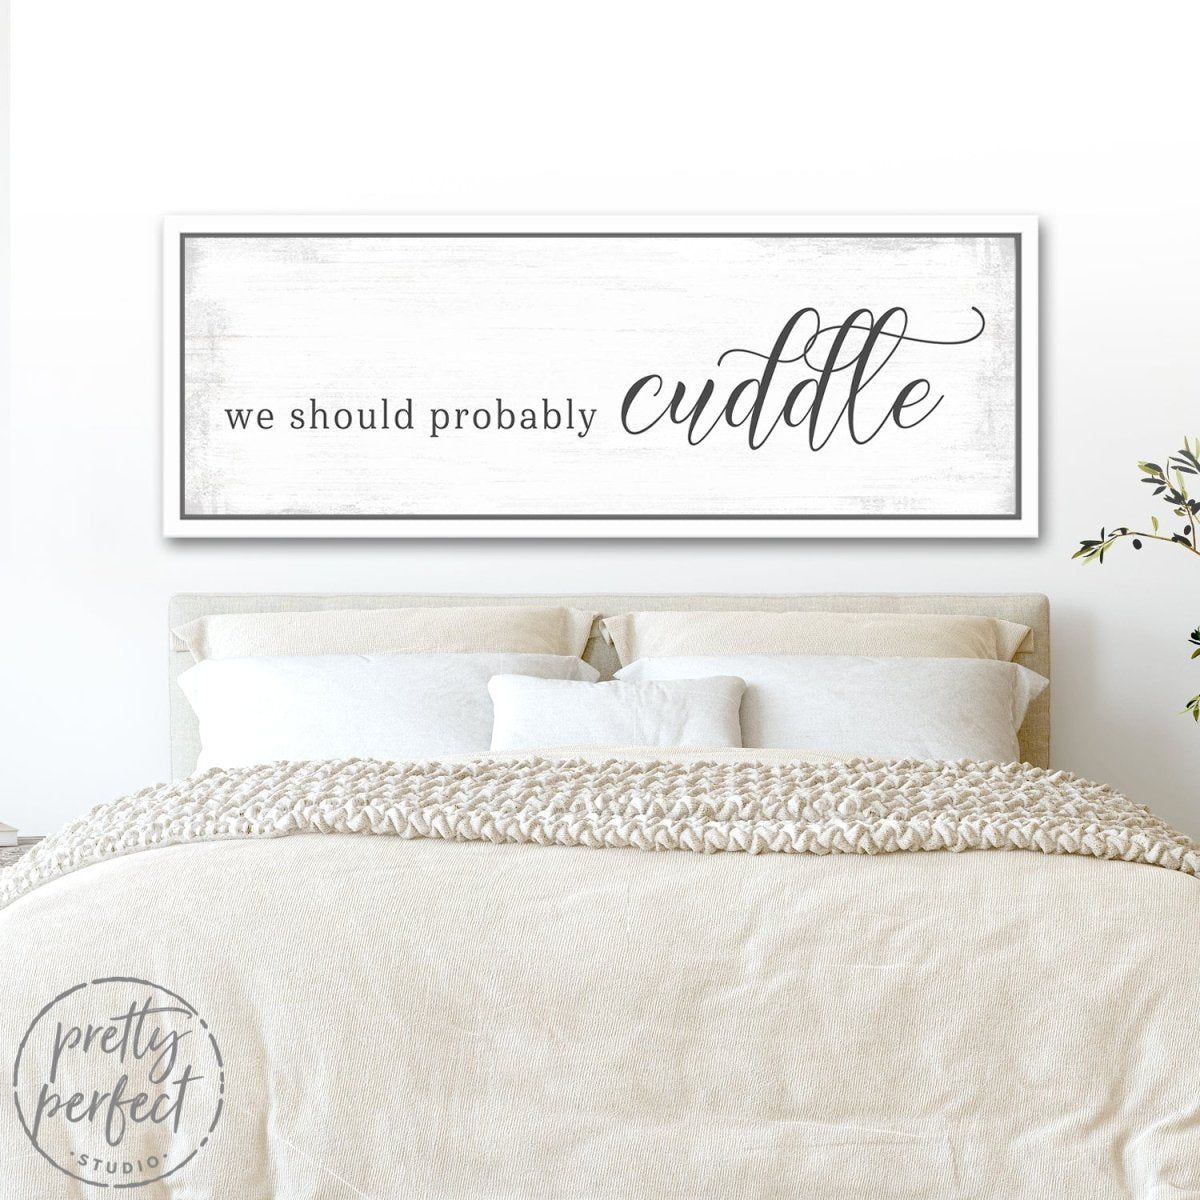 We Should Probably Cuddle Sign Above Bed - Pretty Perfect Studio